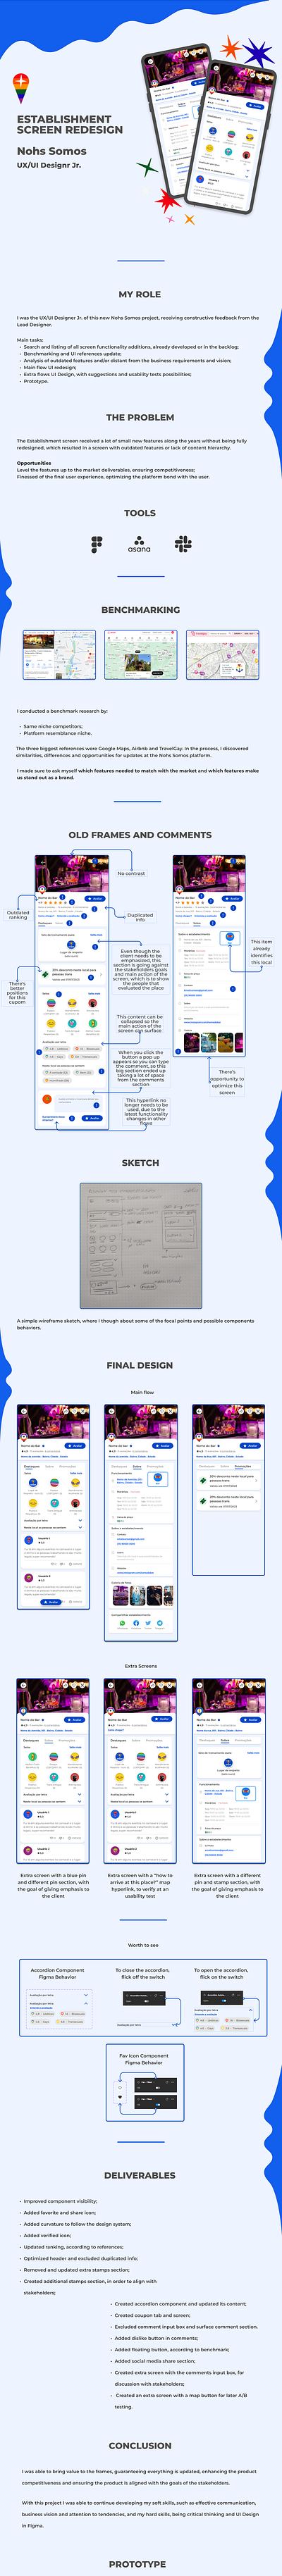 Screen redesign at Nohs Somos app benchmark components critical thinking design figma product designer prototype redesign ui ux uxui design